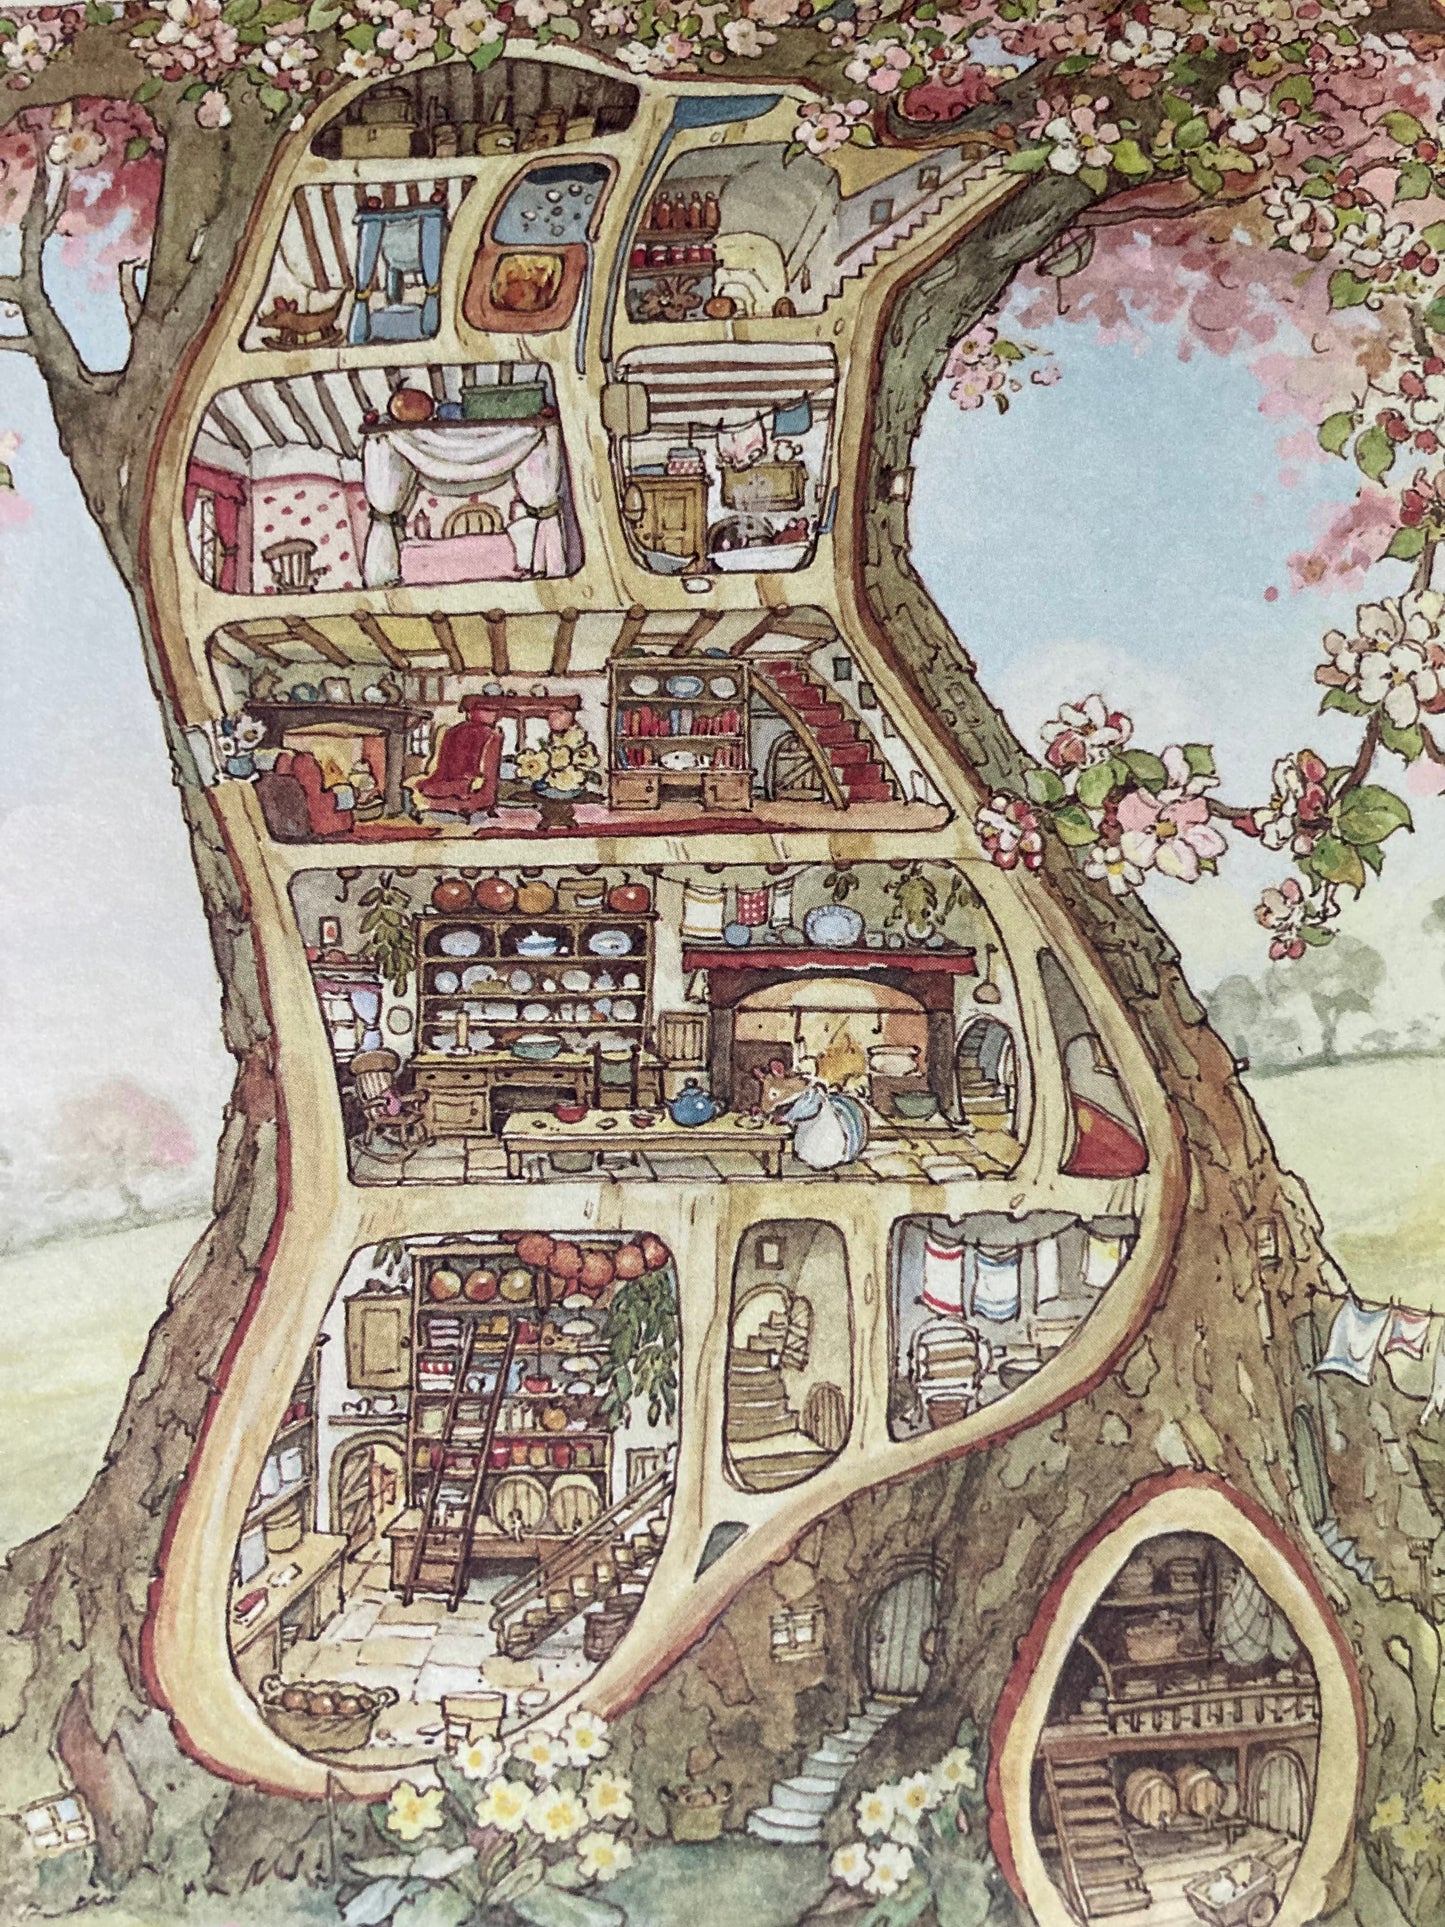 Children's Picture Book - SPRING STORY of THE MICE OF BRAMBLY HEDGE